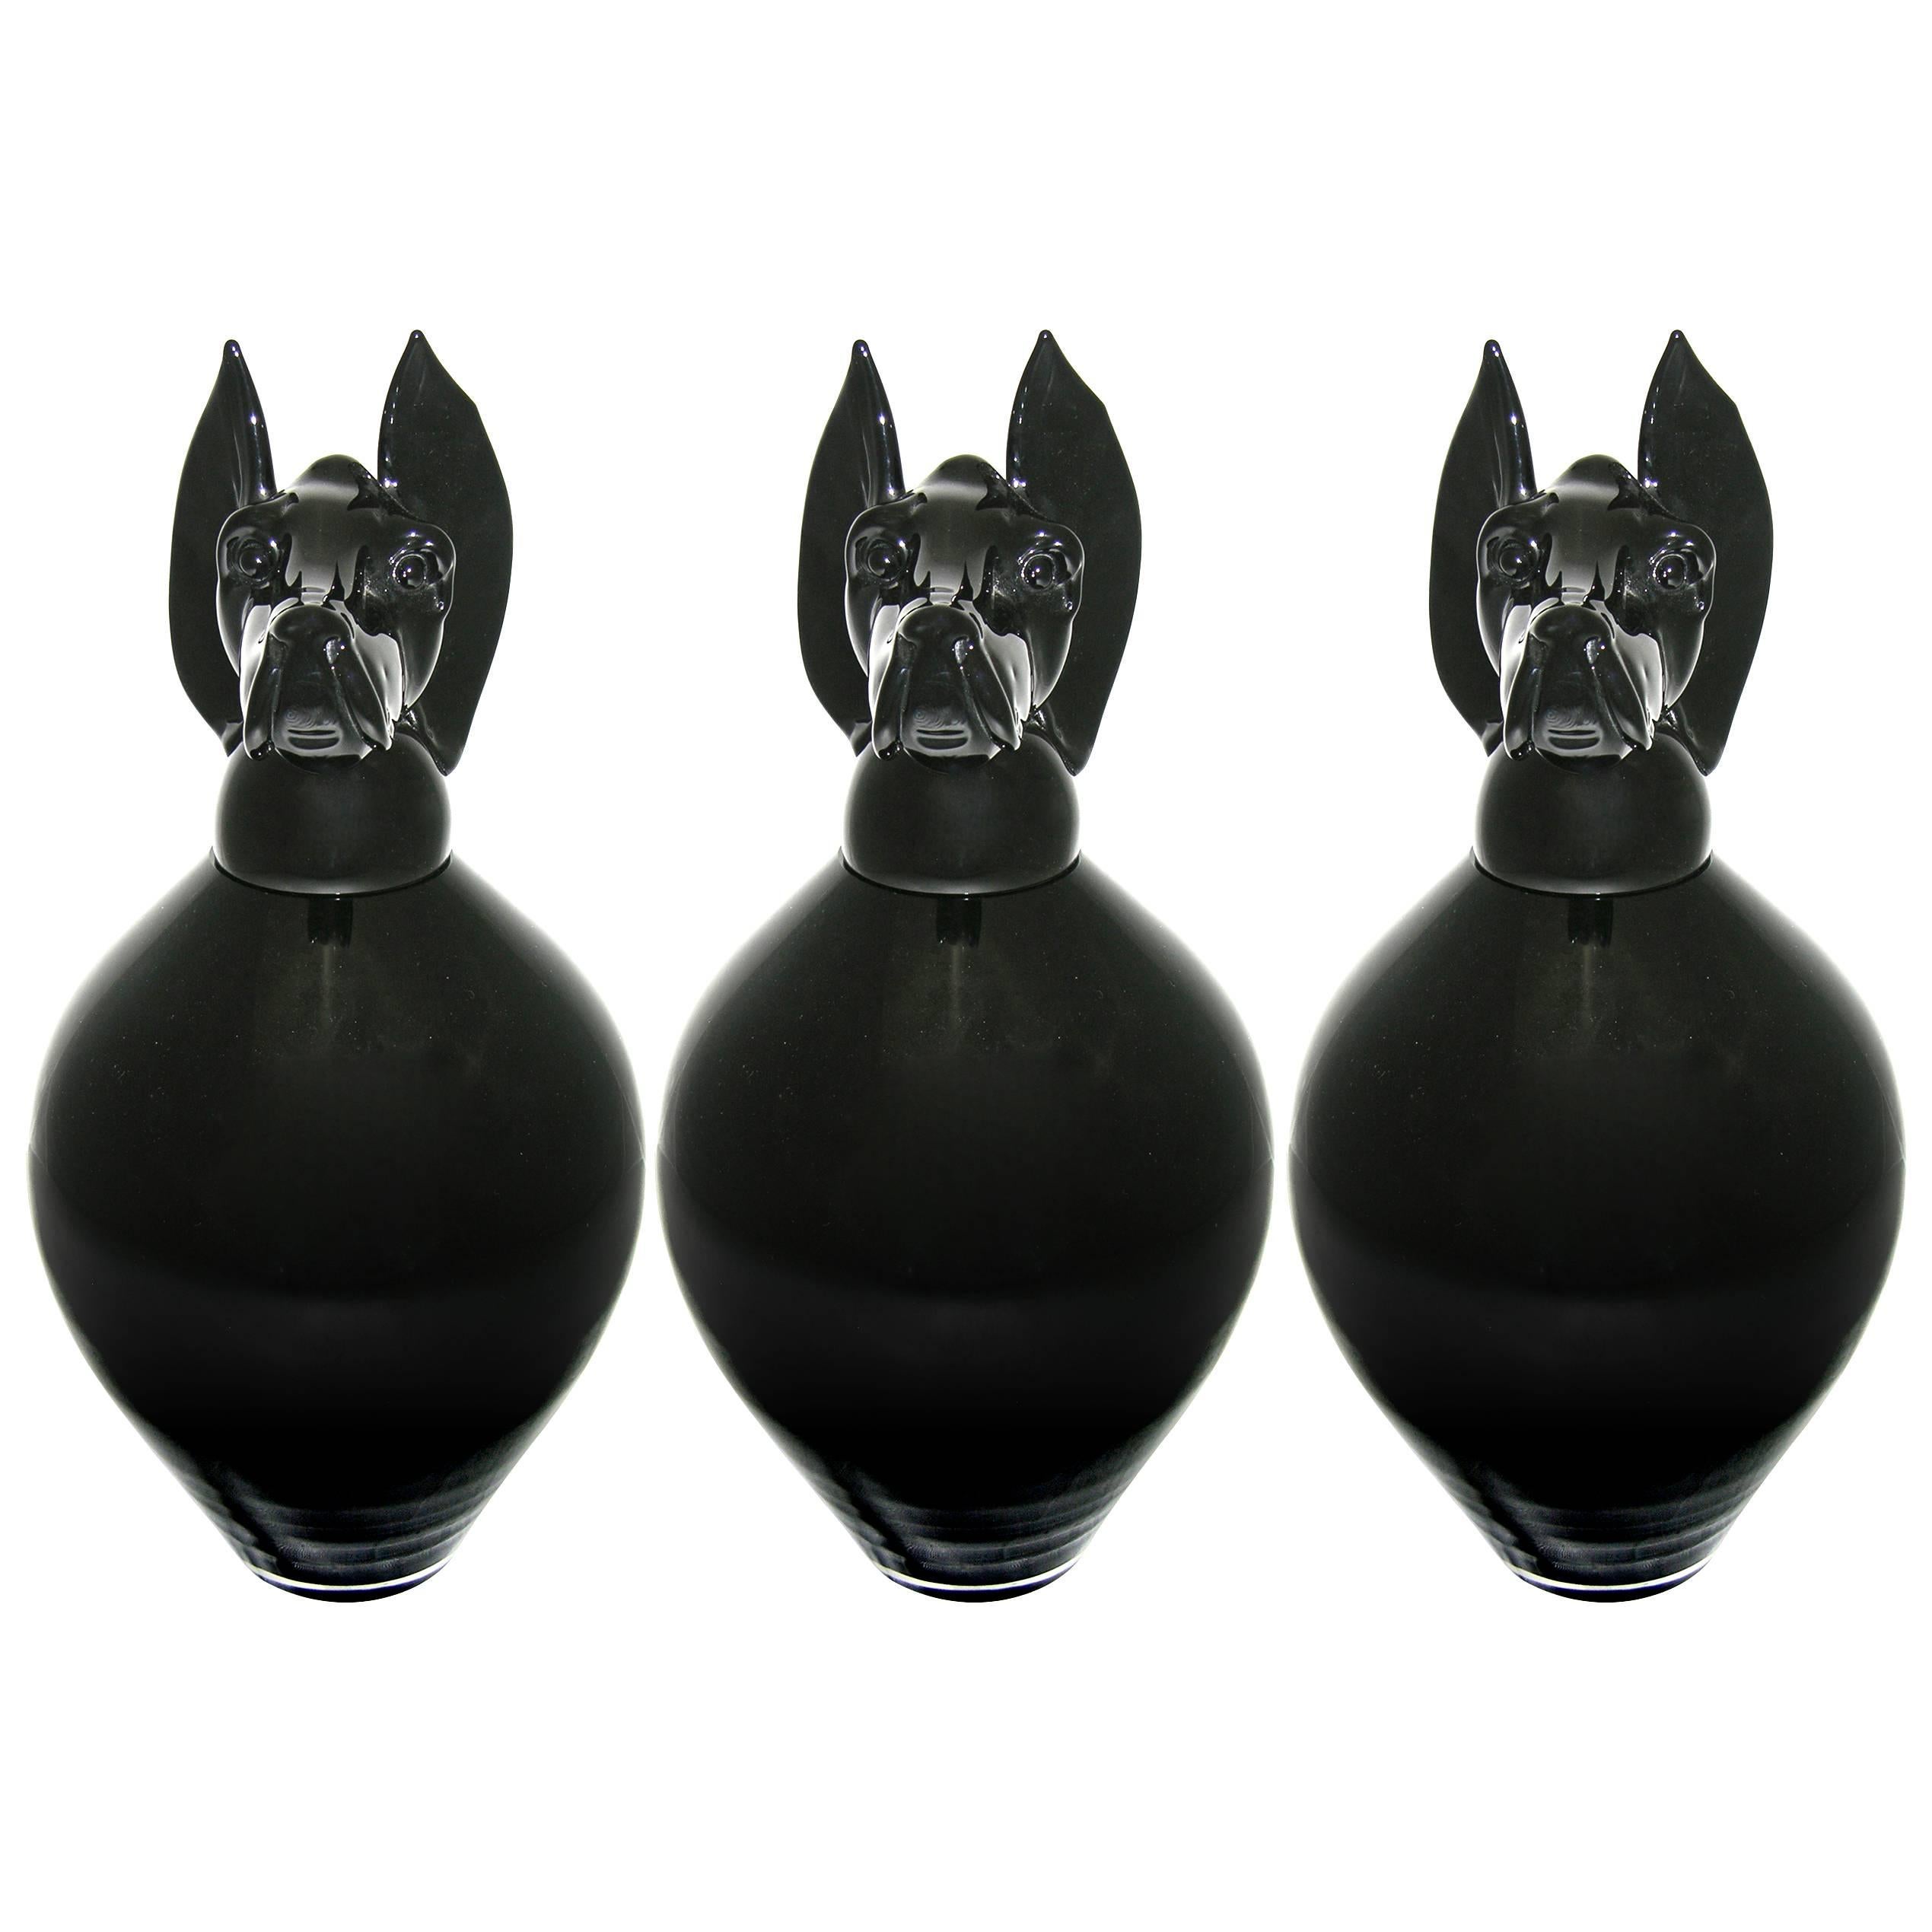 Formia 2001 Italian Black Murano Glass Bottle with Dog Head Stopper For Sale 2